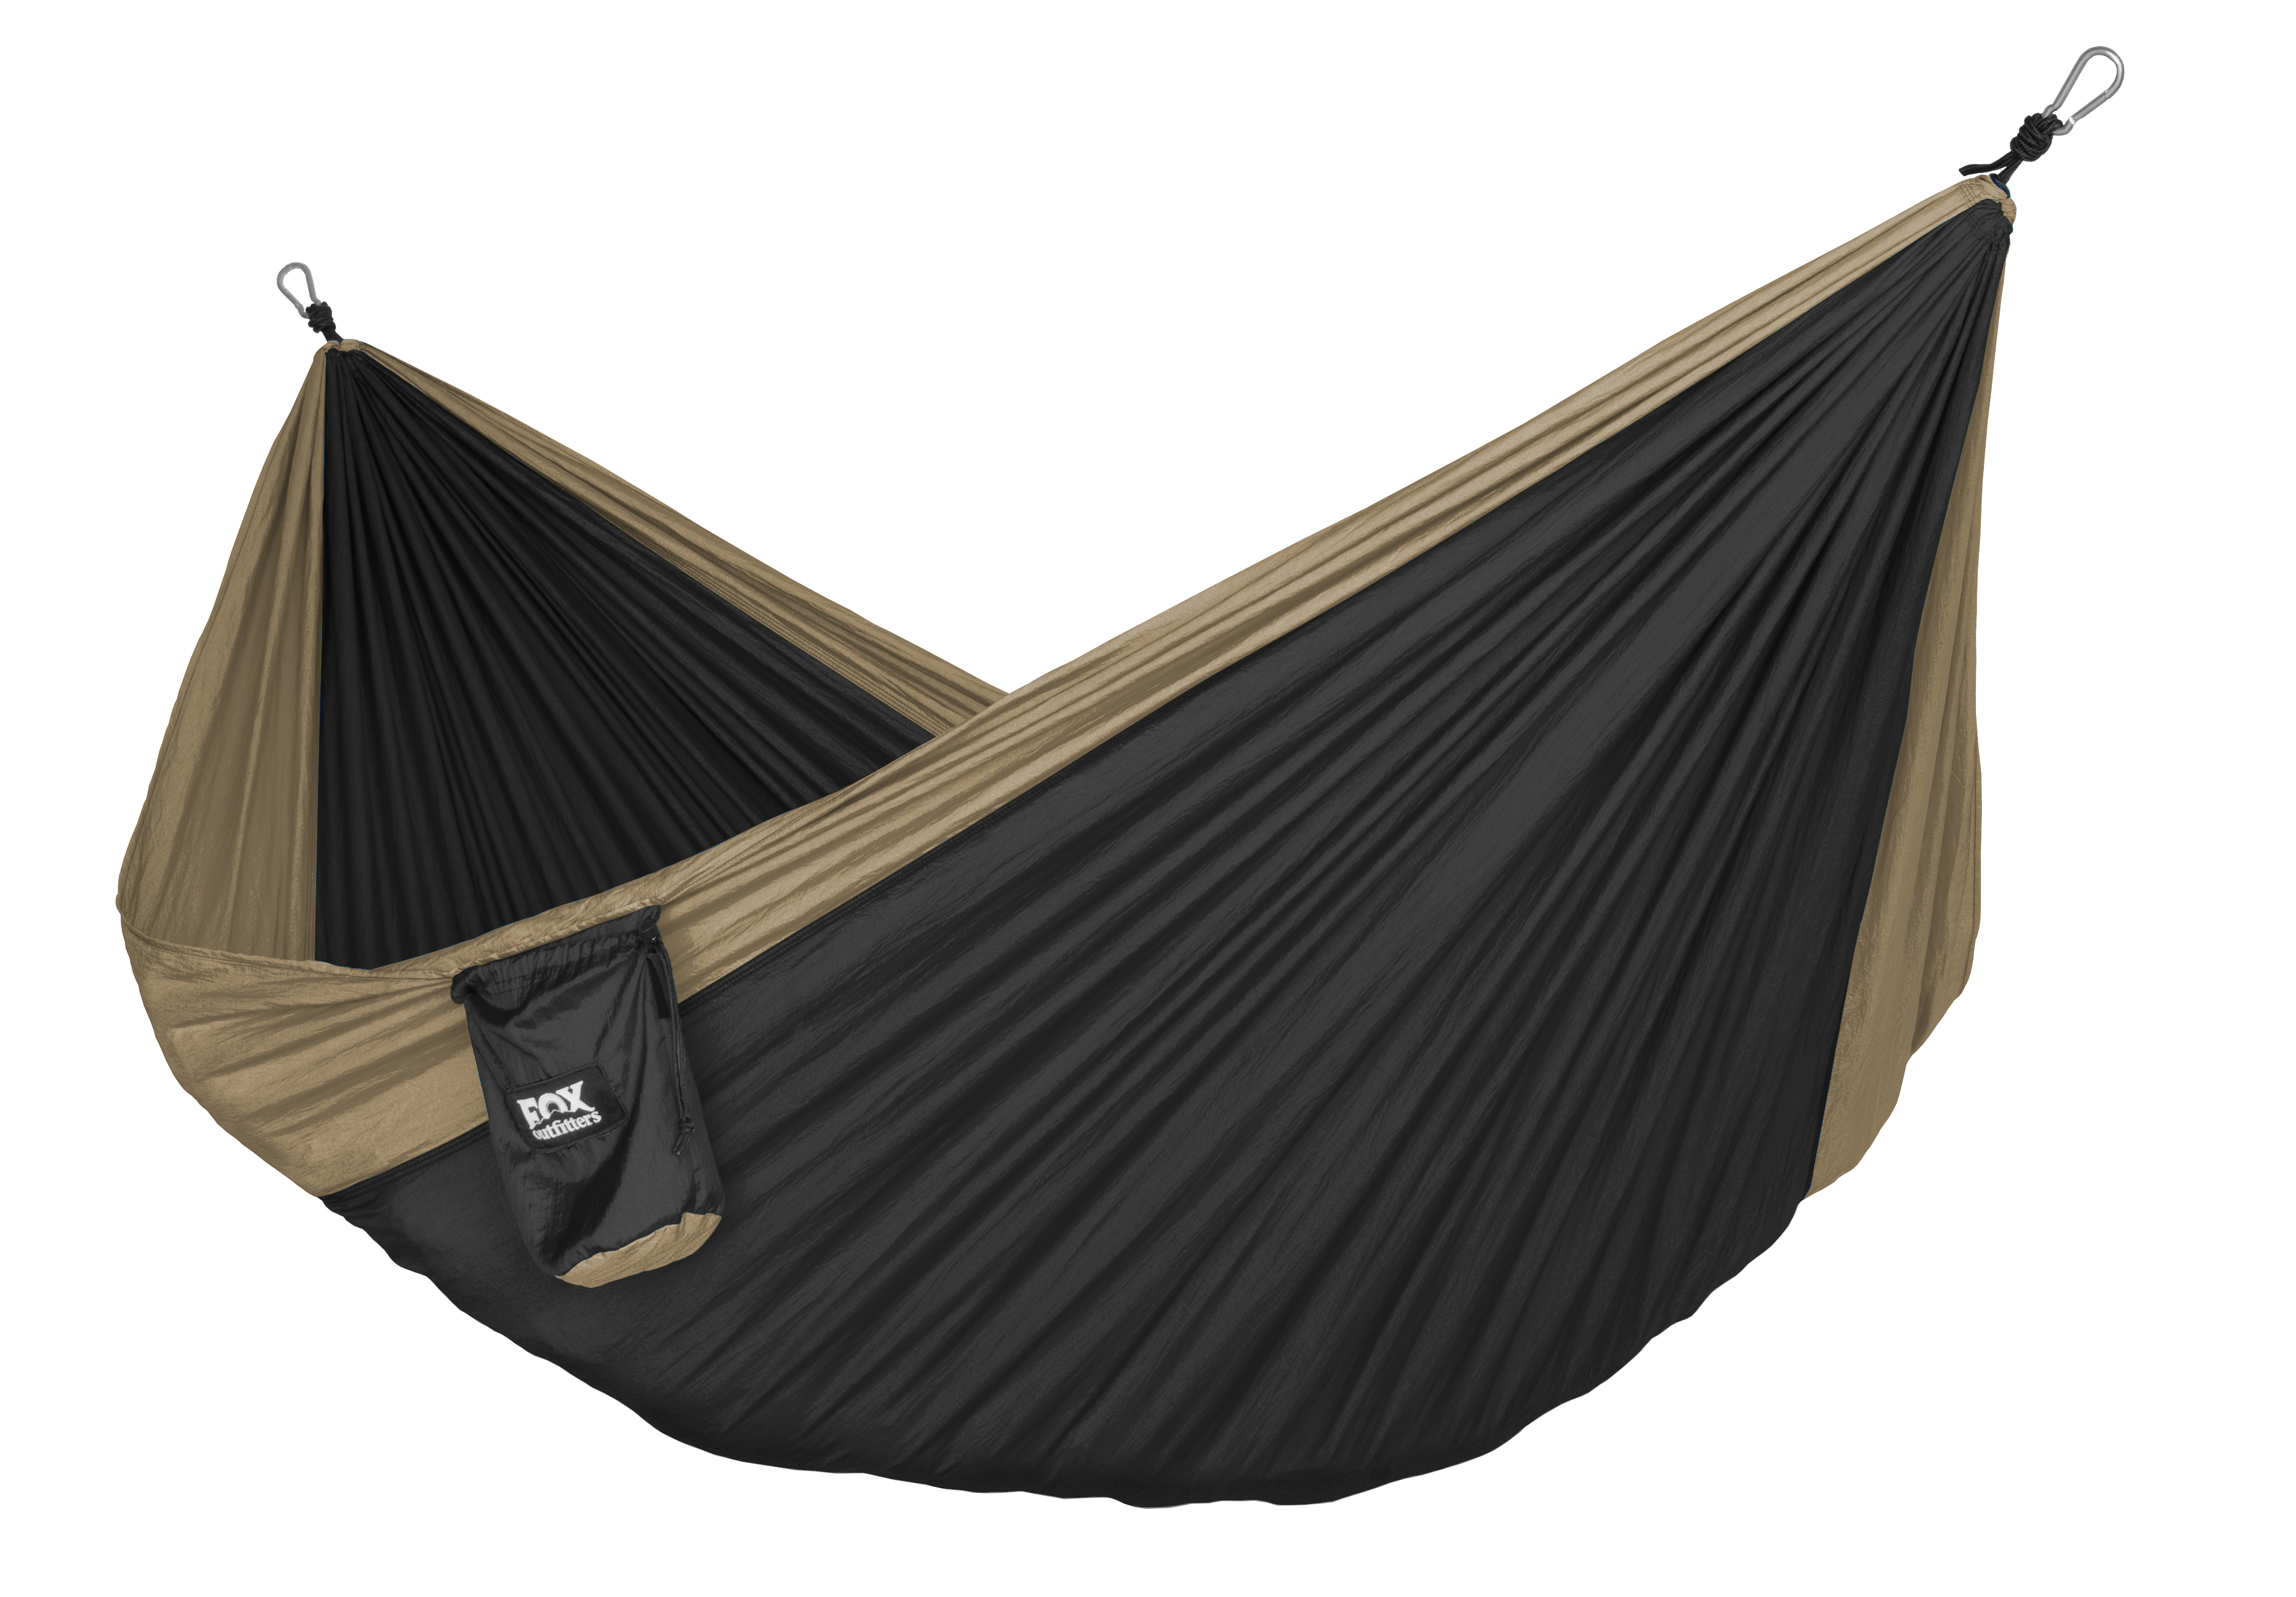 Neolite Single Camping Hammock - Lightweight Portable Nylon Parachute Hammock for Backpacking, Travel, Beach, Yard. Hammock Straps & Steel Carabiners Included - image 1 of 5